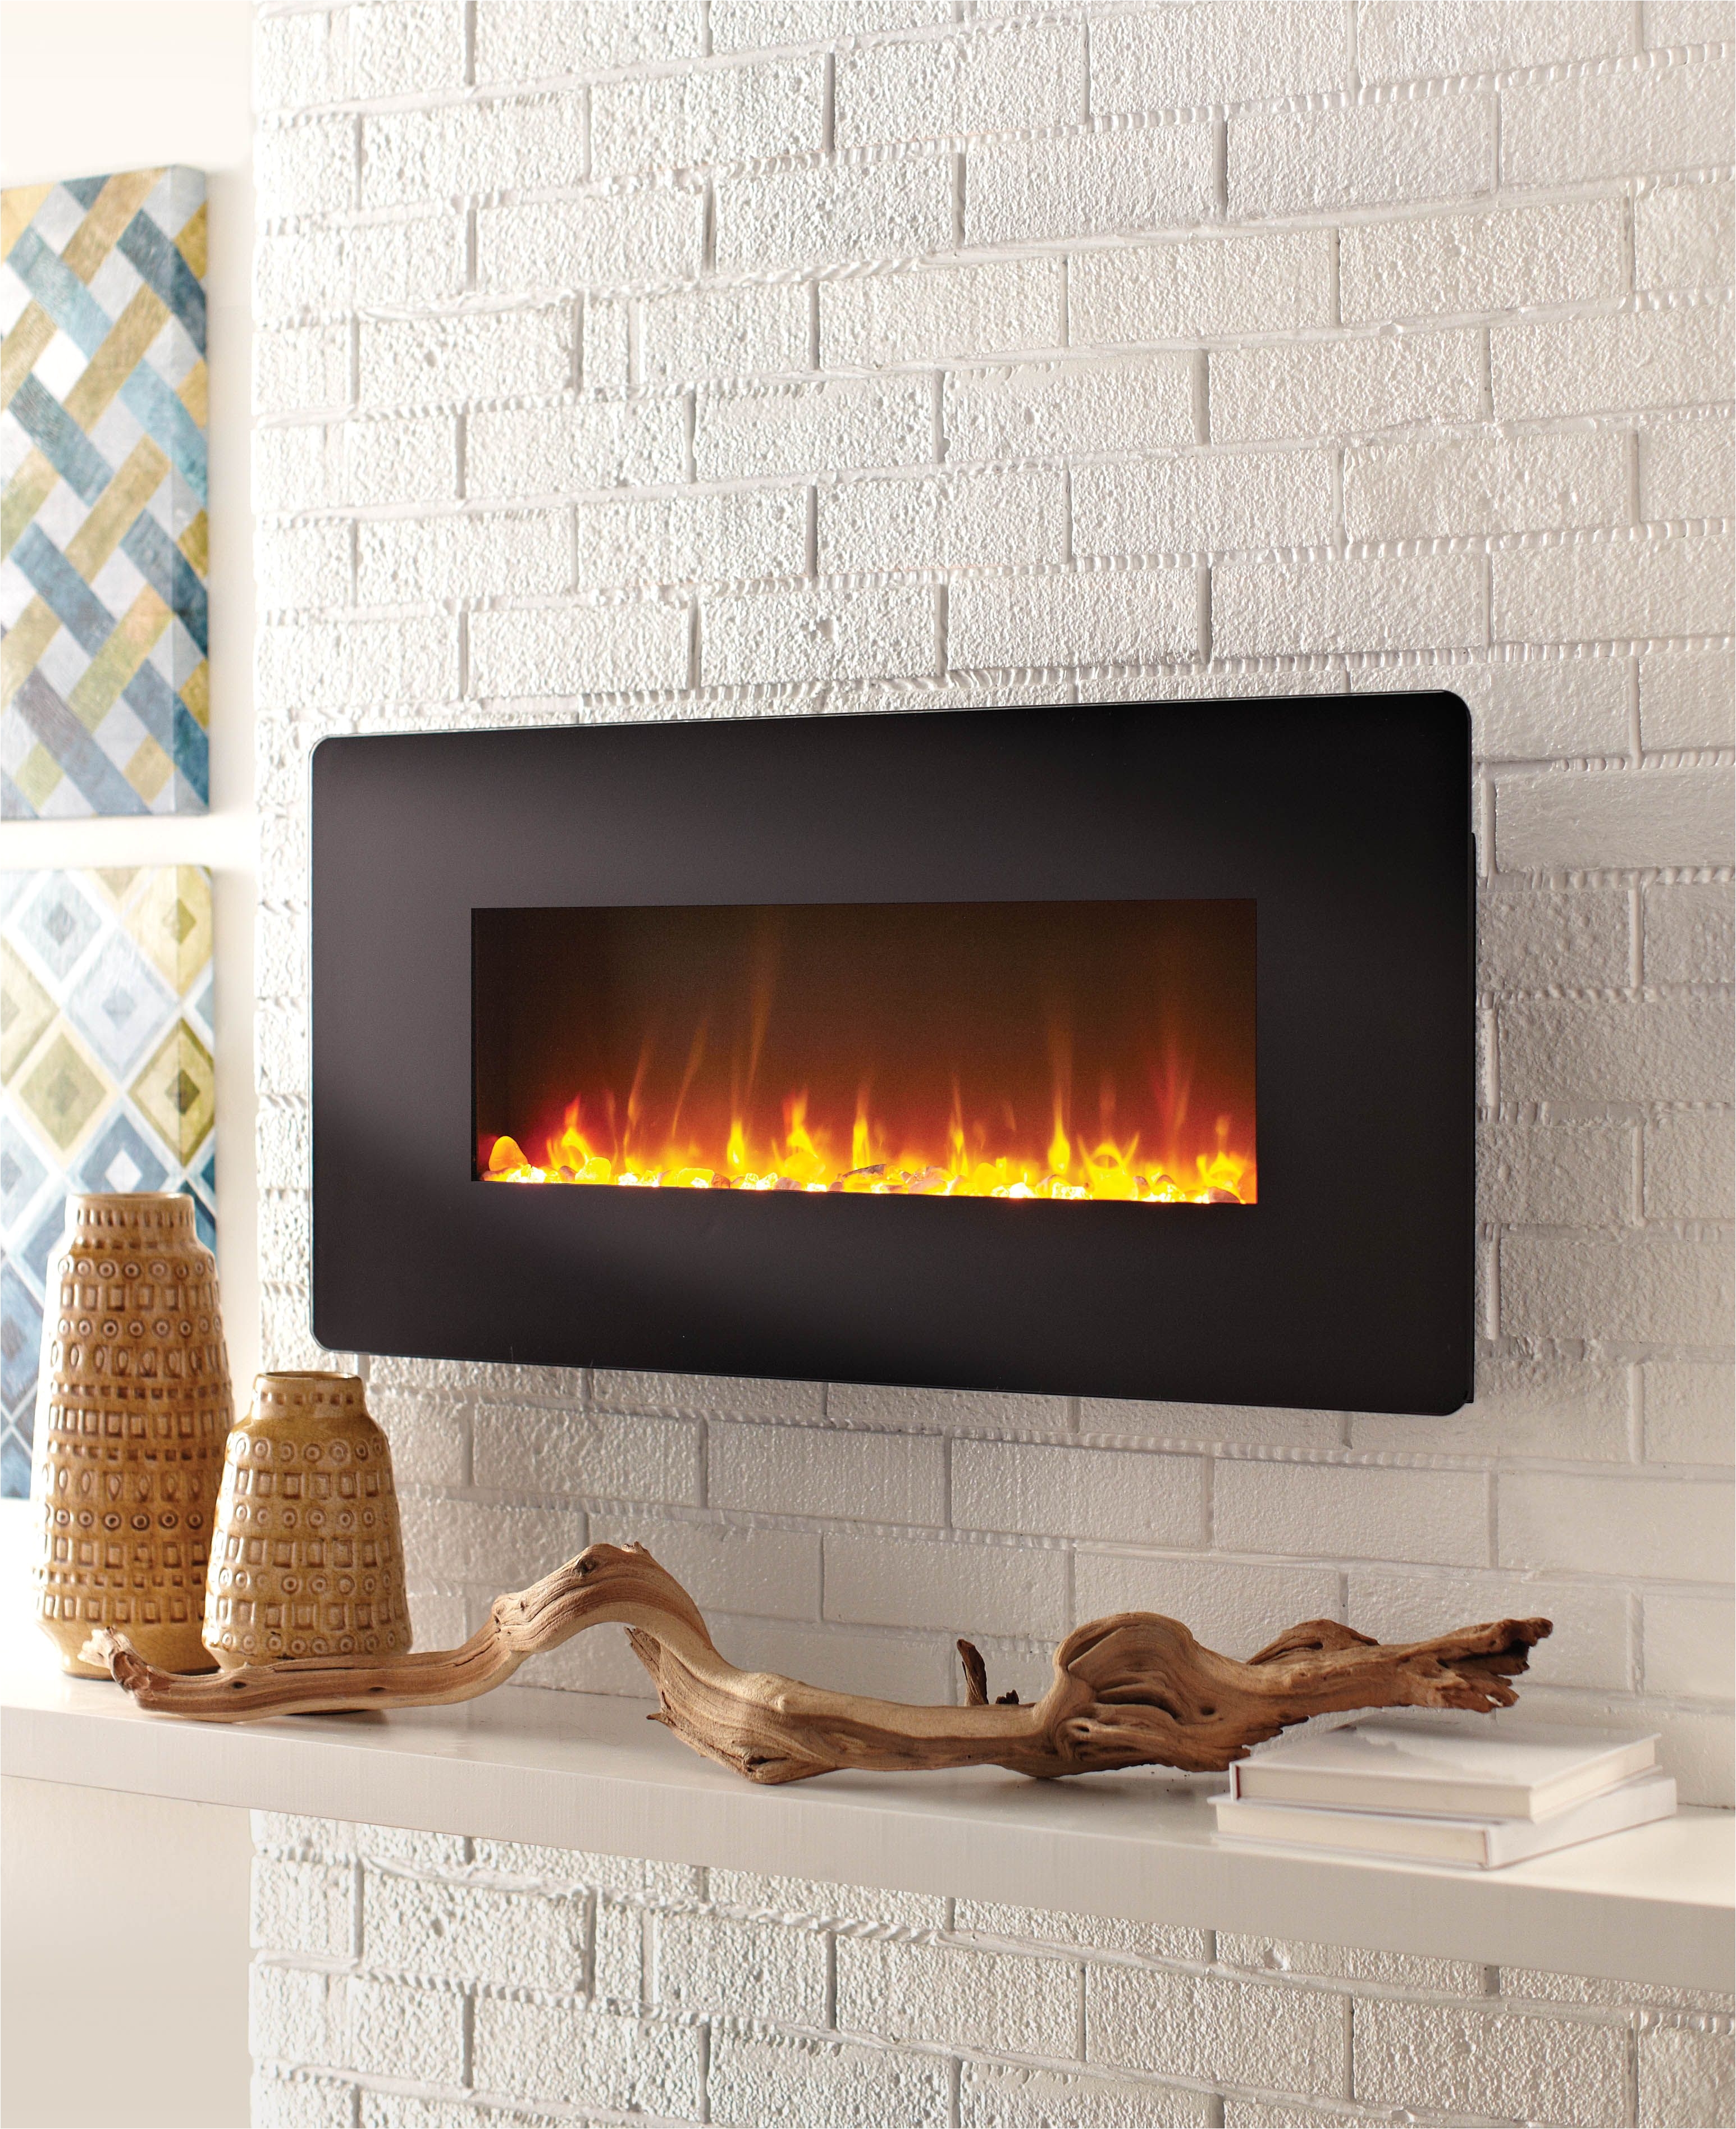 with touchscreen display and led backlight this home decorators collection fireplace available at the home depota will create a cozy ambience in a room